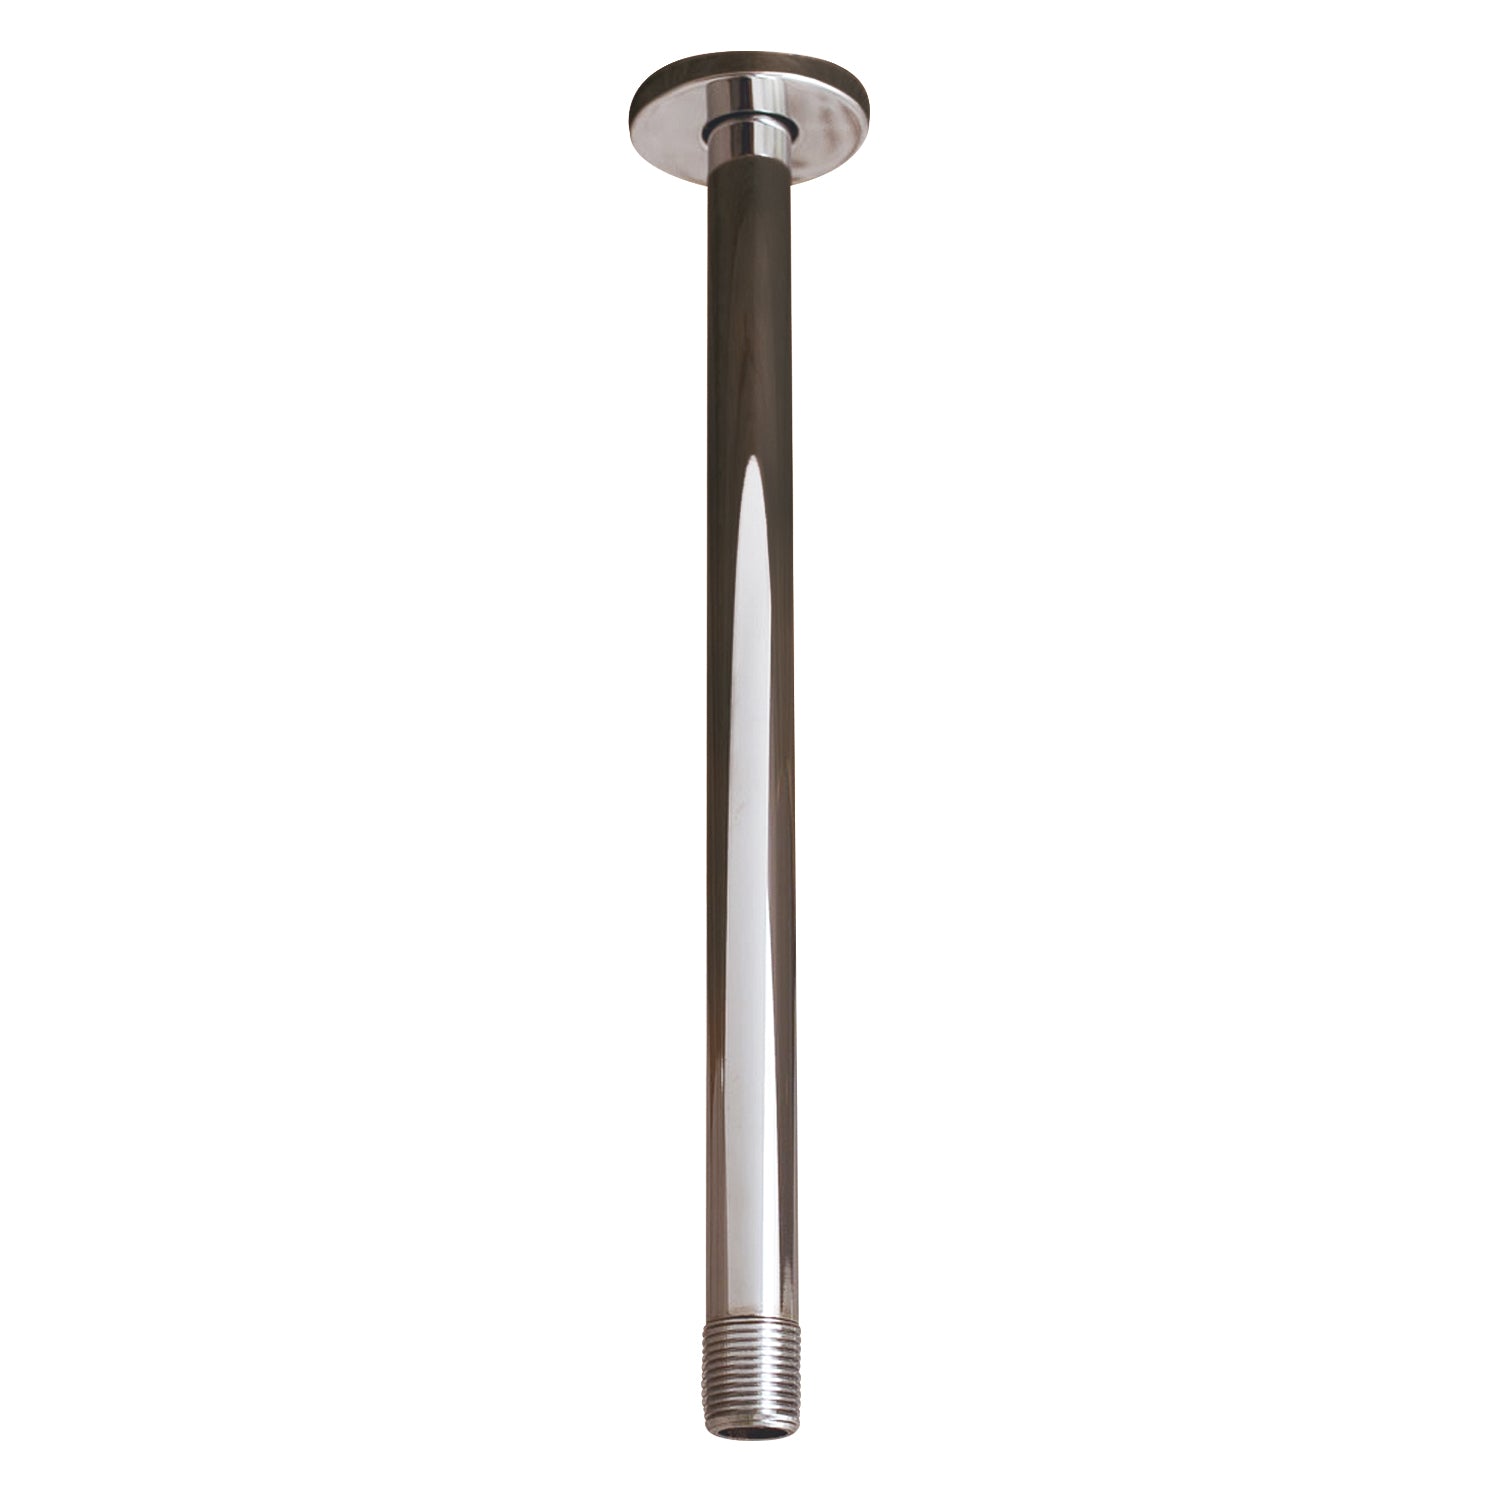 DAX Round Shower Arm, Brass Body, Ceiling Mount, Brushed Nickel Finish, 12 Inches (D-F18-12-BN)